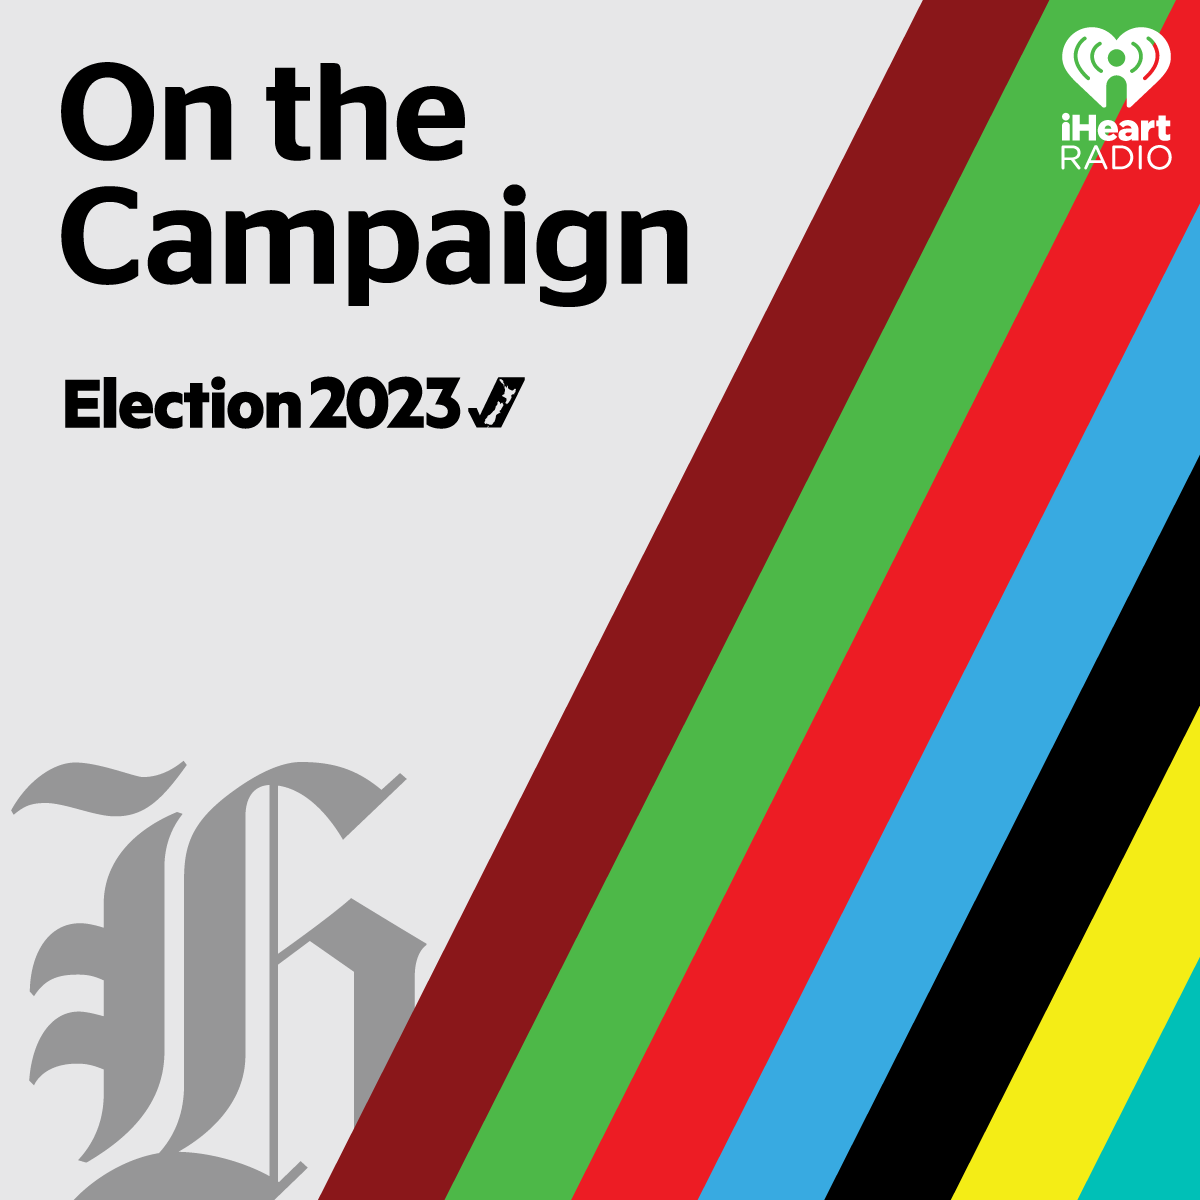 On The Campaign: How important are the debates for this election?